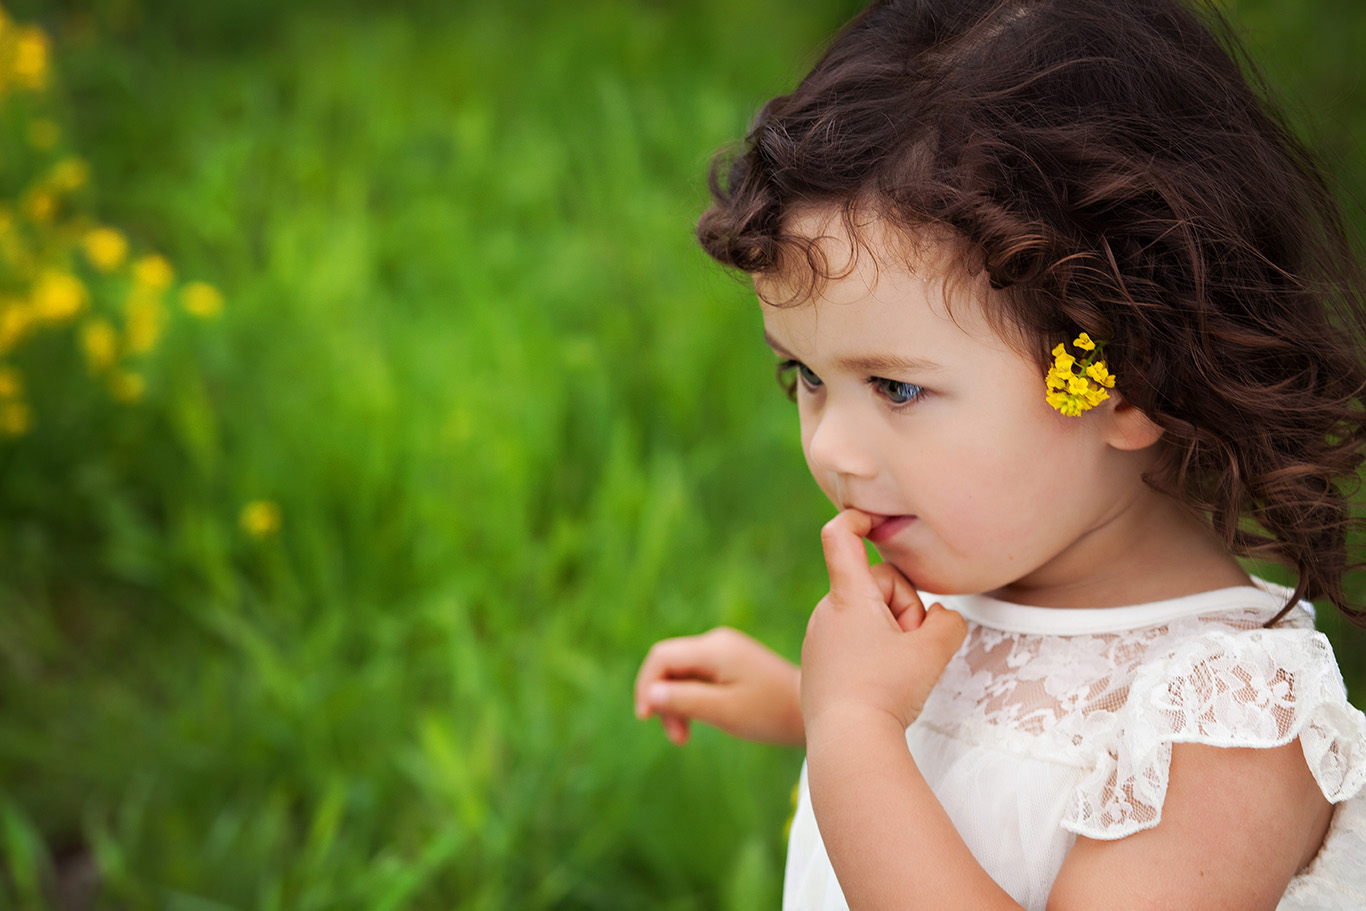 Little girl walking through a field of spring flowers with a flower in her hair